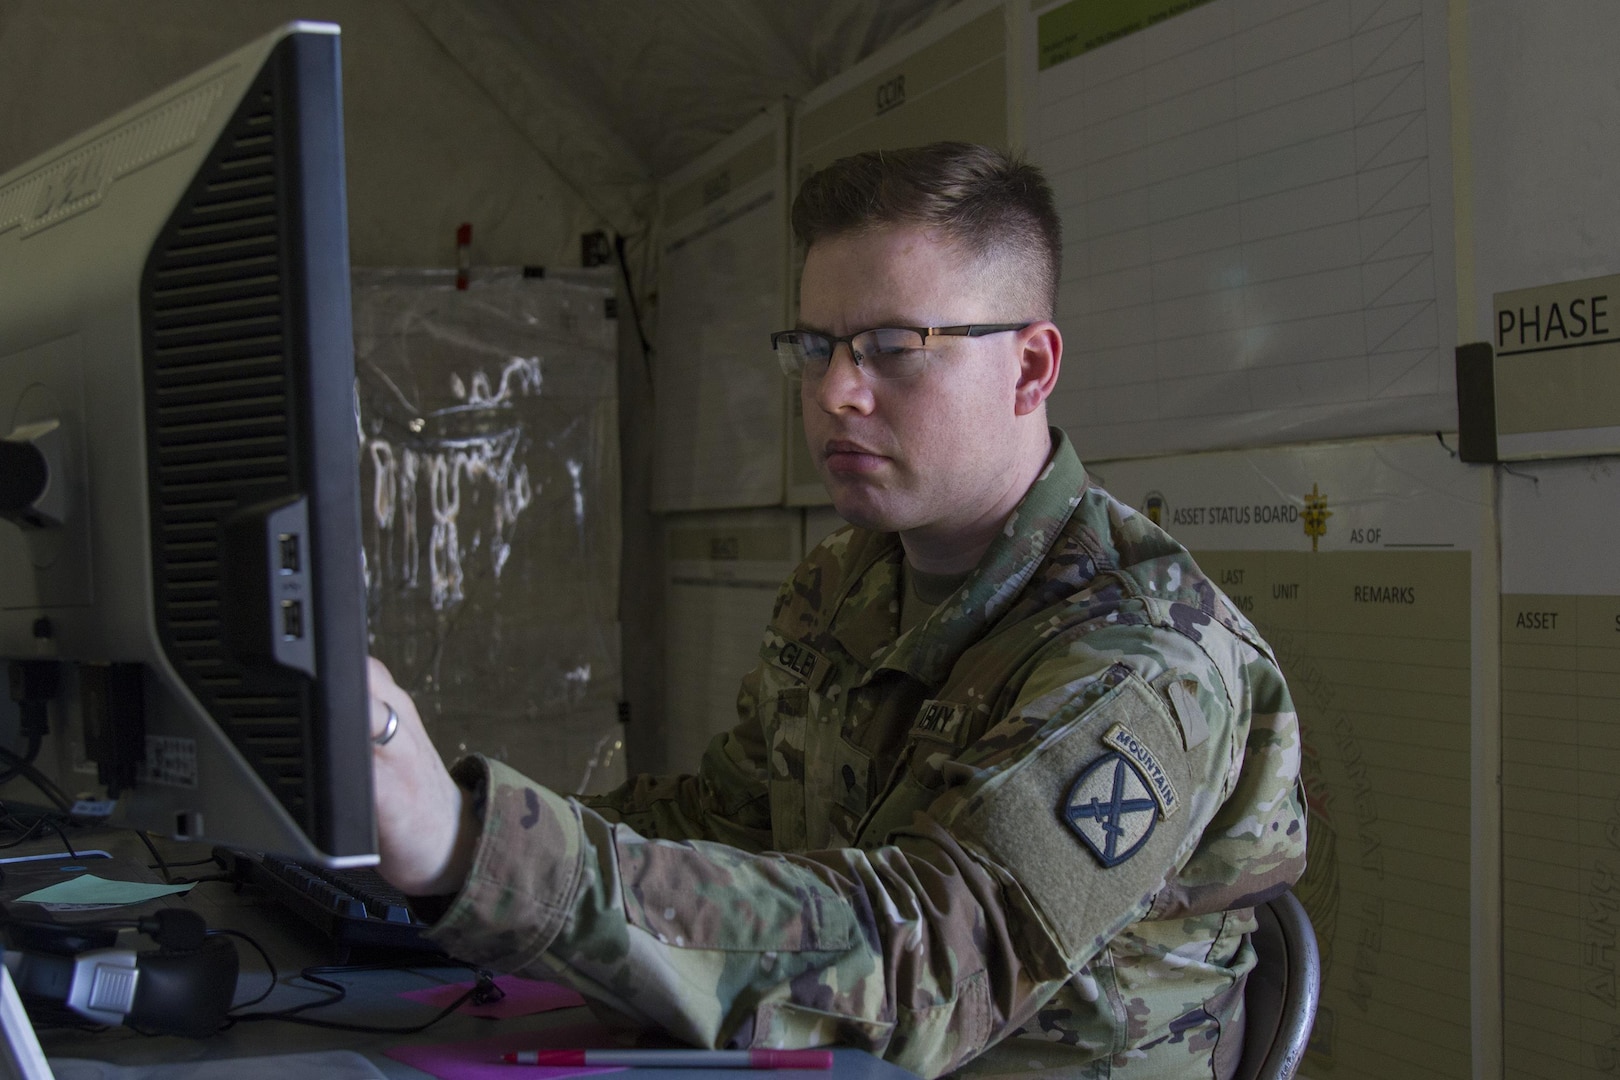 Soldiers participate in warfighter exercise